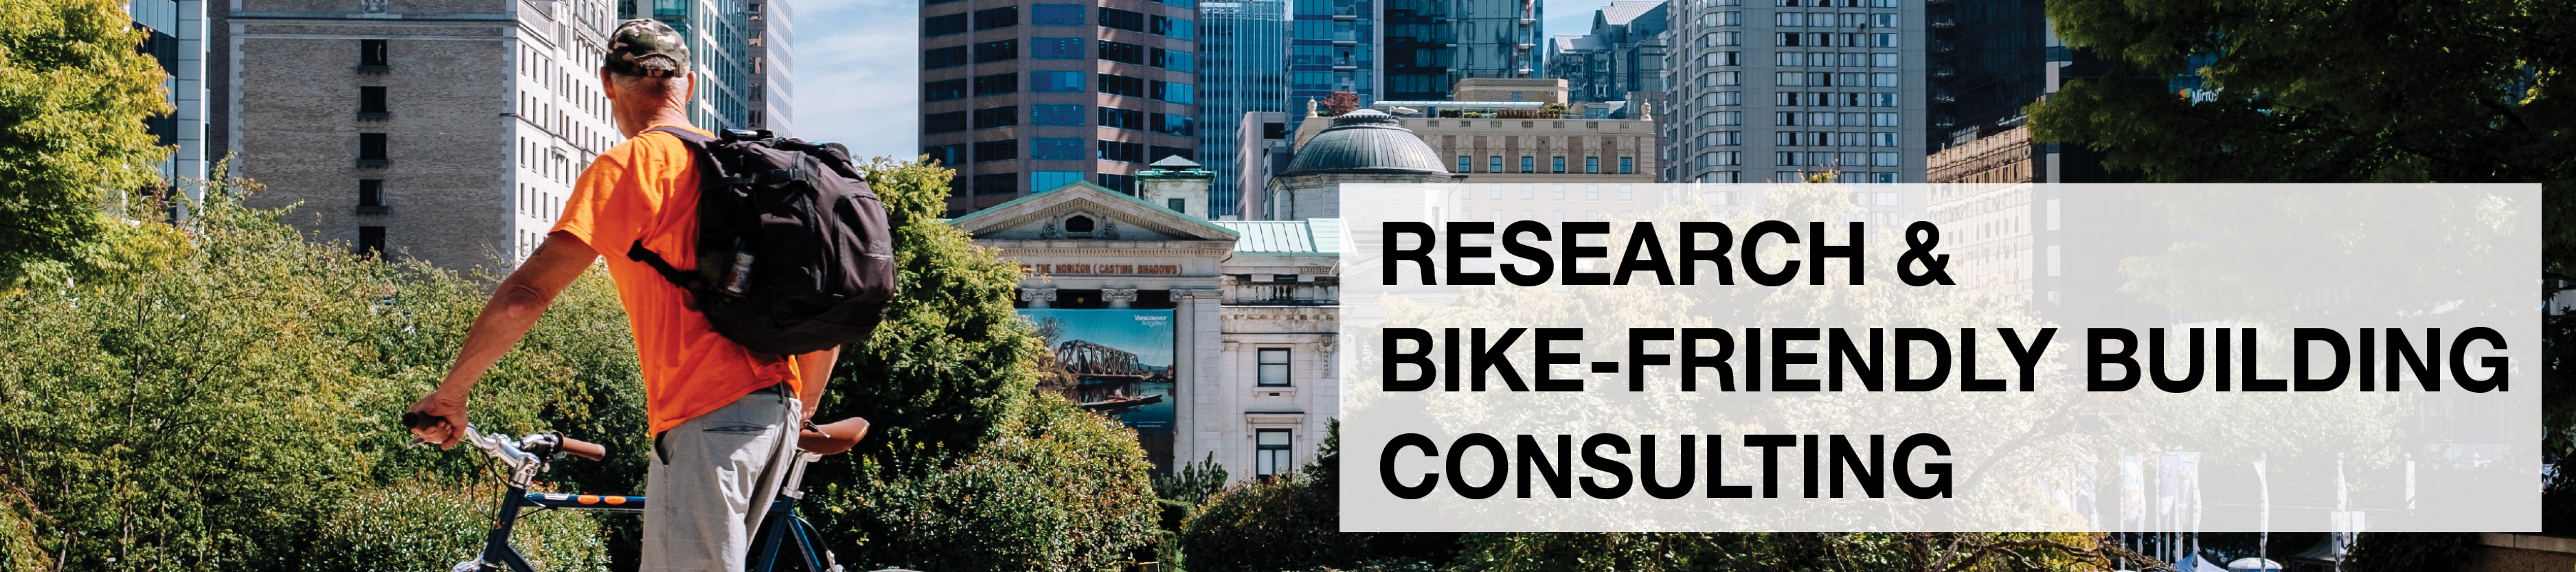 Research & Bike-Friendly Building Consulting. A man stands with his bike and looks at downtown Vancouver's building landscape.